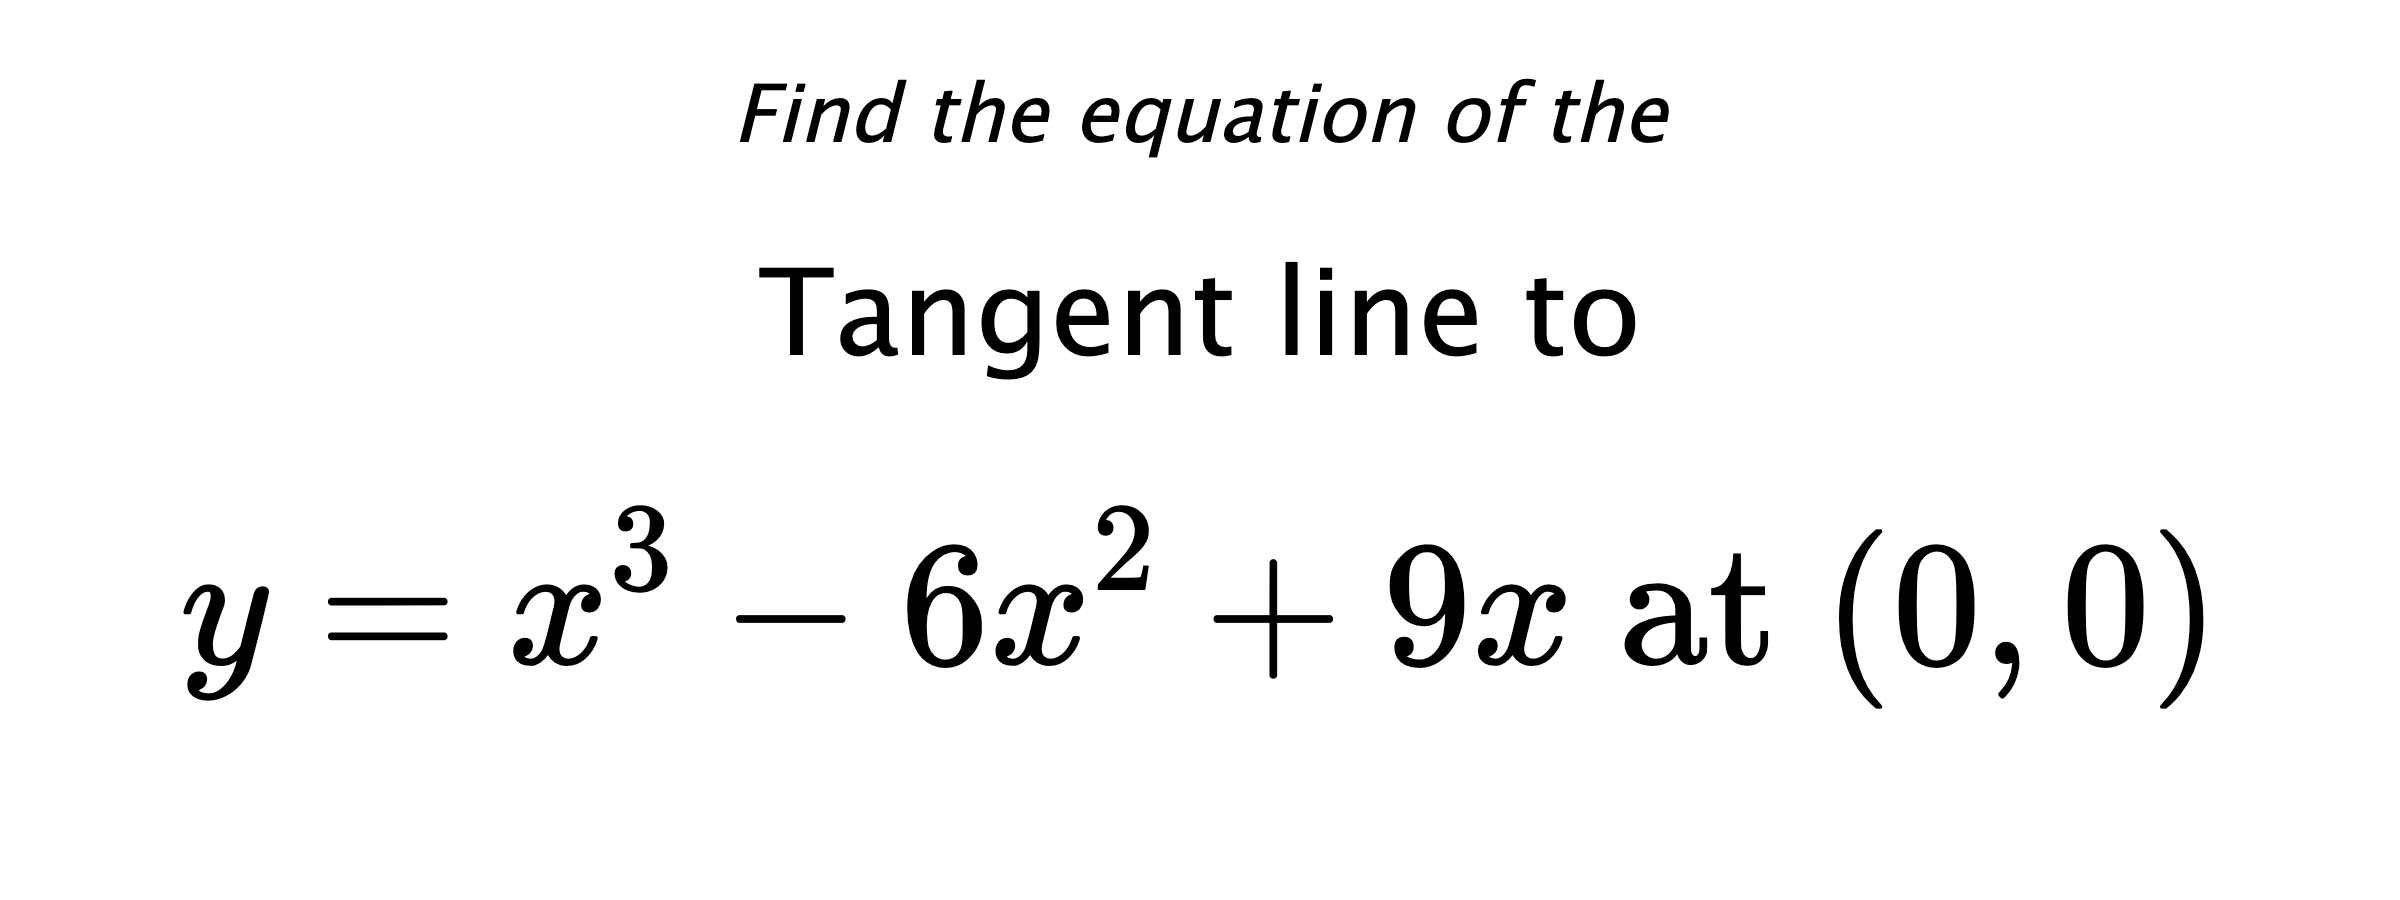 Find the equation of the Tangent line to $$ y=x^3-6x^2+9x \text{ at } (0,0) $$